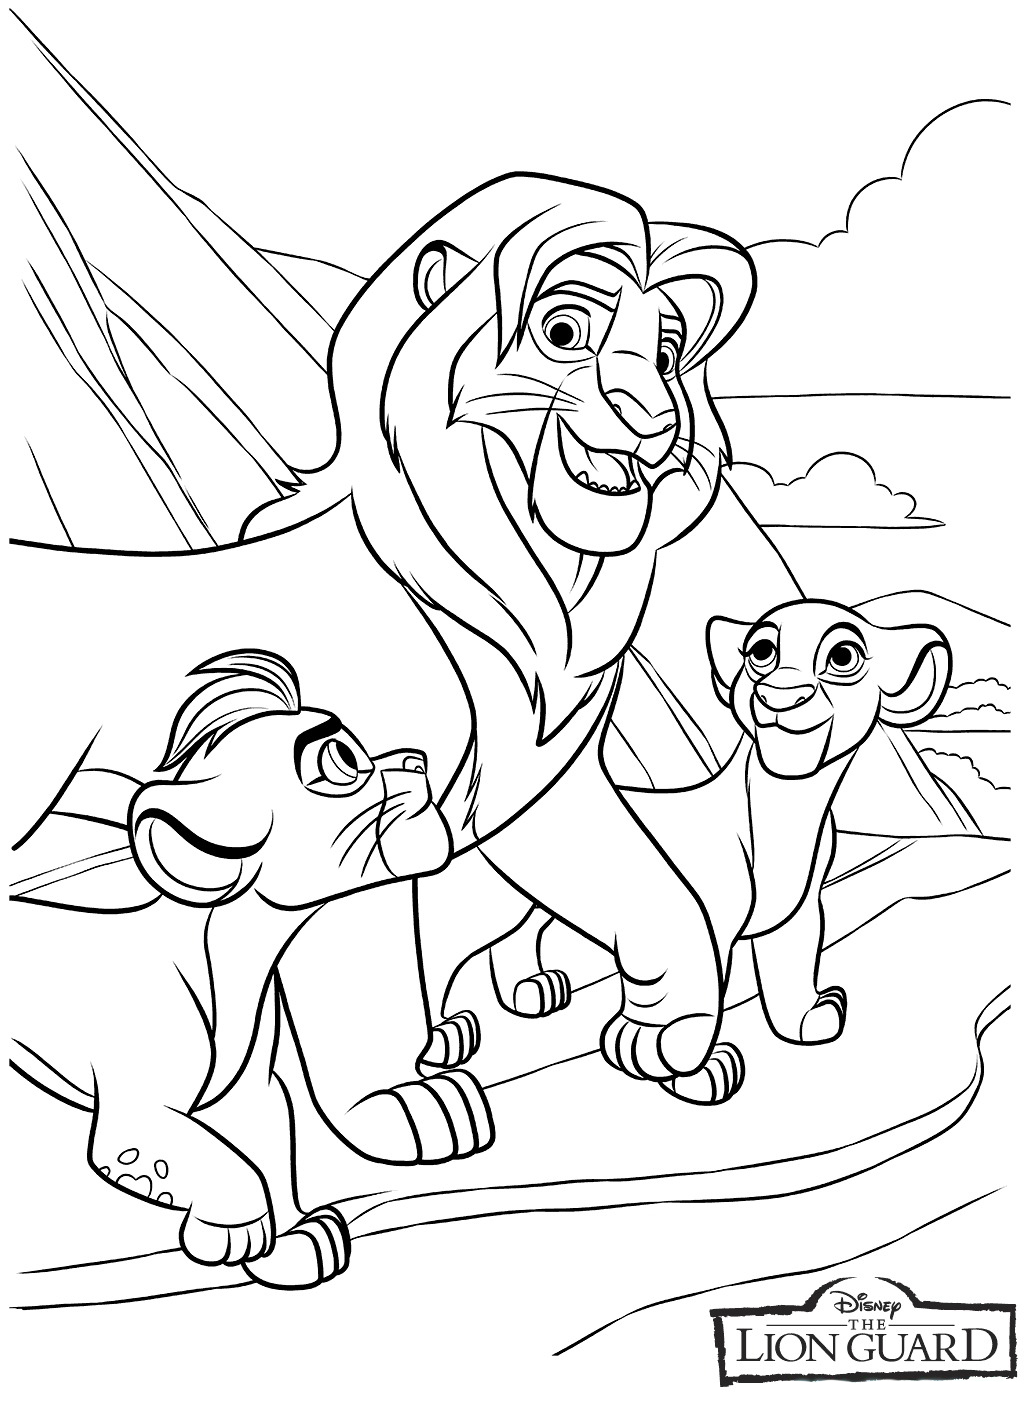 Lion Guard Coloring Pages - Best Coloring Pages For Kids